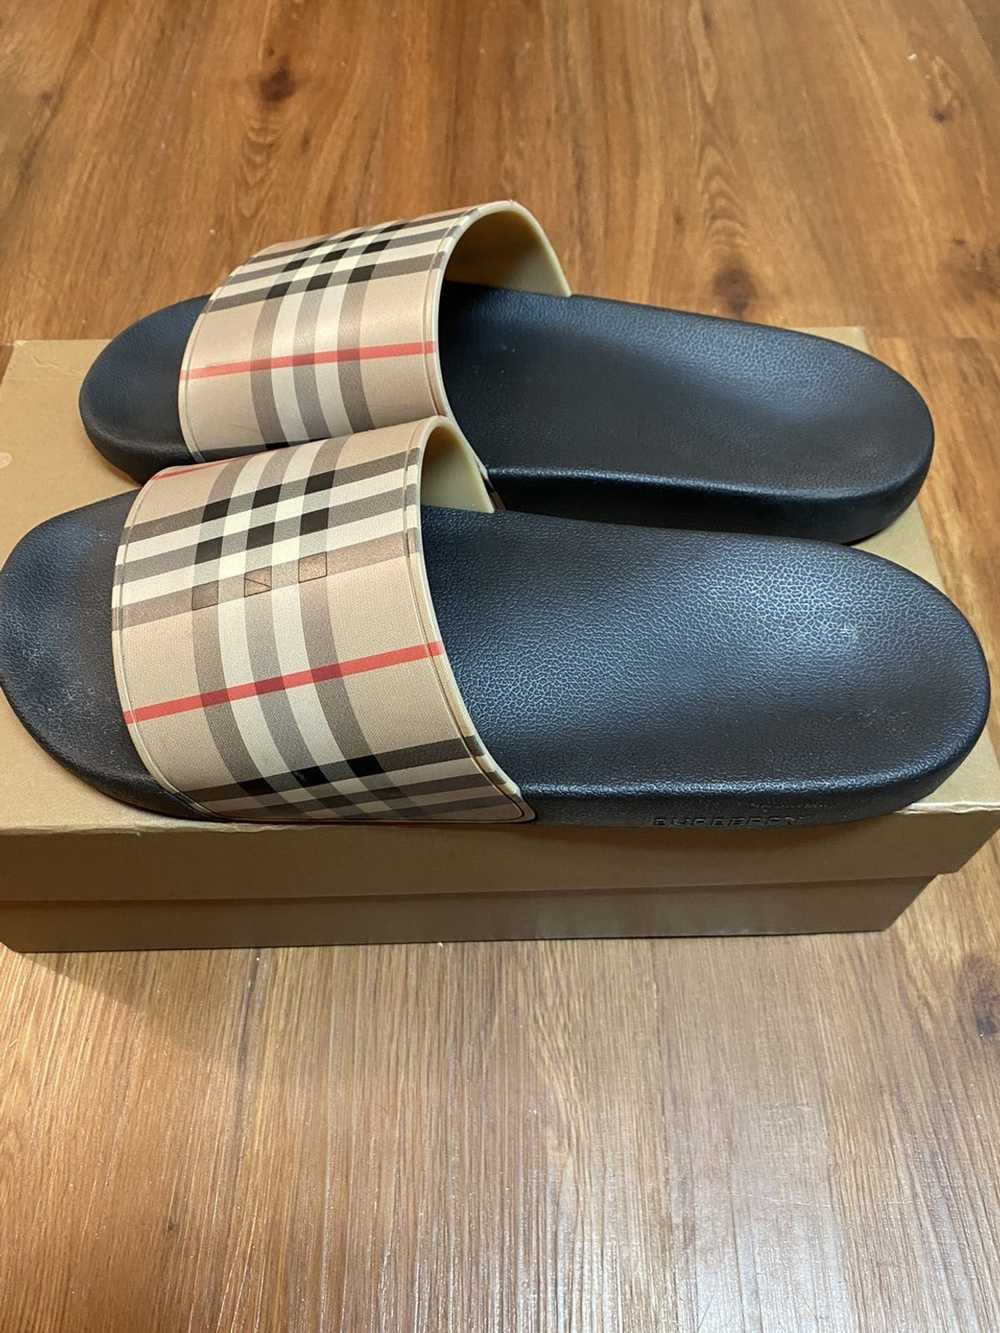 Burberry Burberry Furley Check Pool slides size 12 - image 3